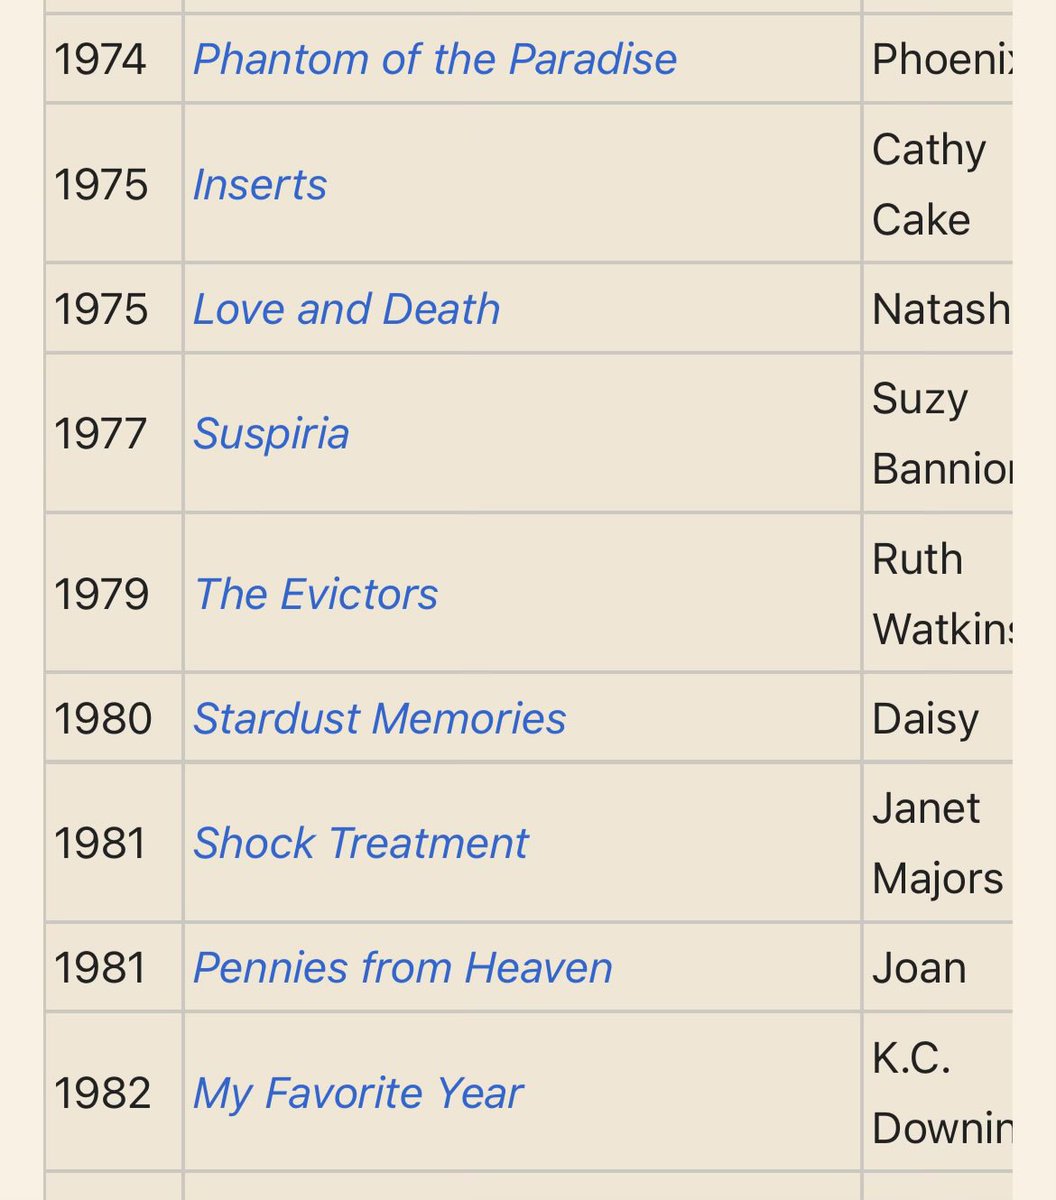 This was a hell of a run, and Jessica Harper deserved to be a bigger star.